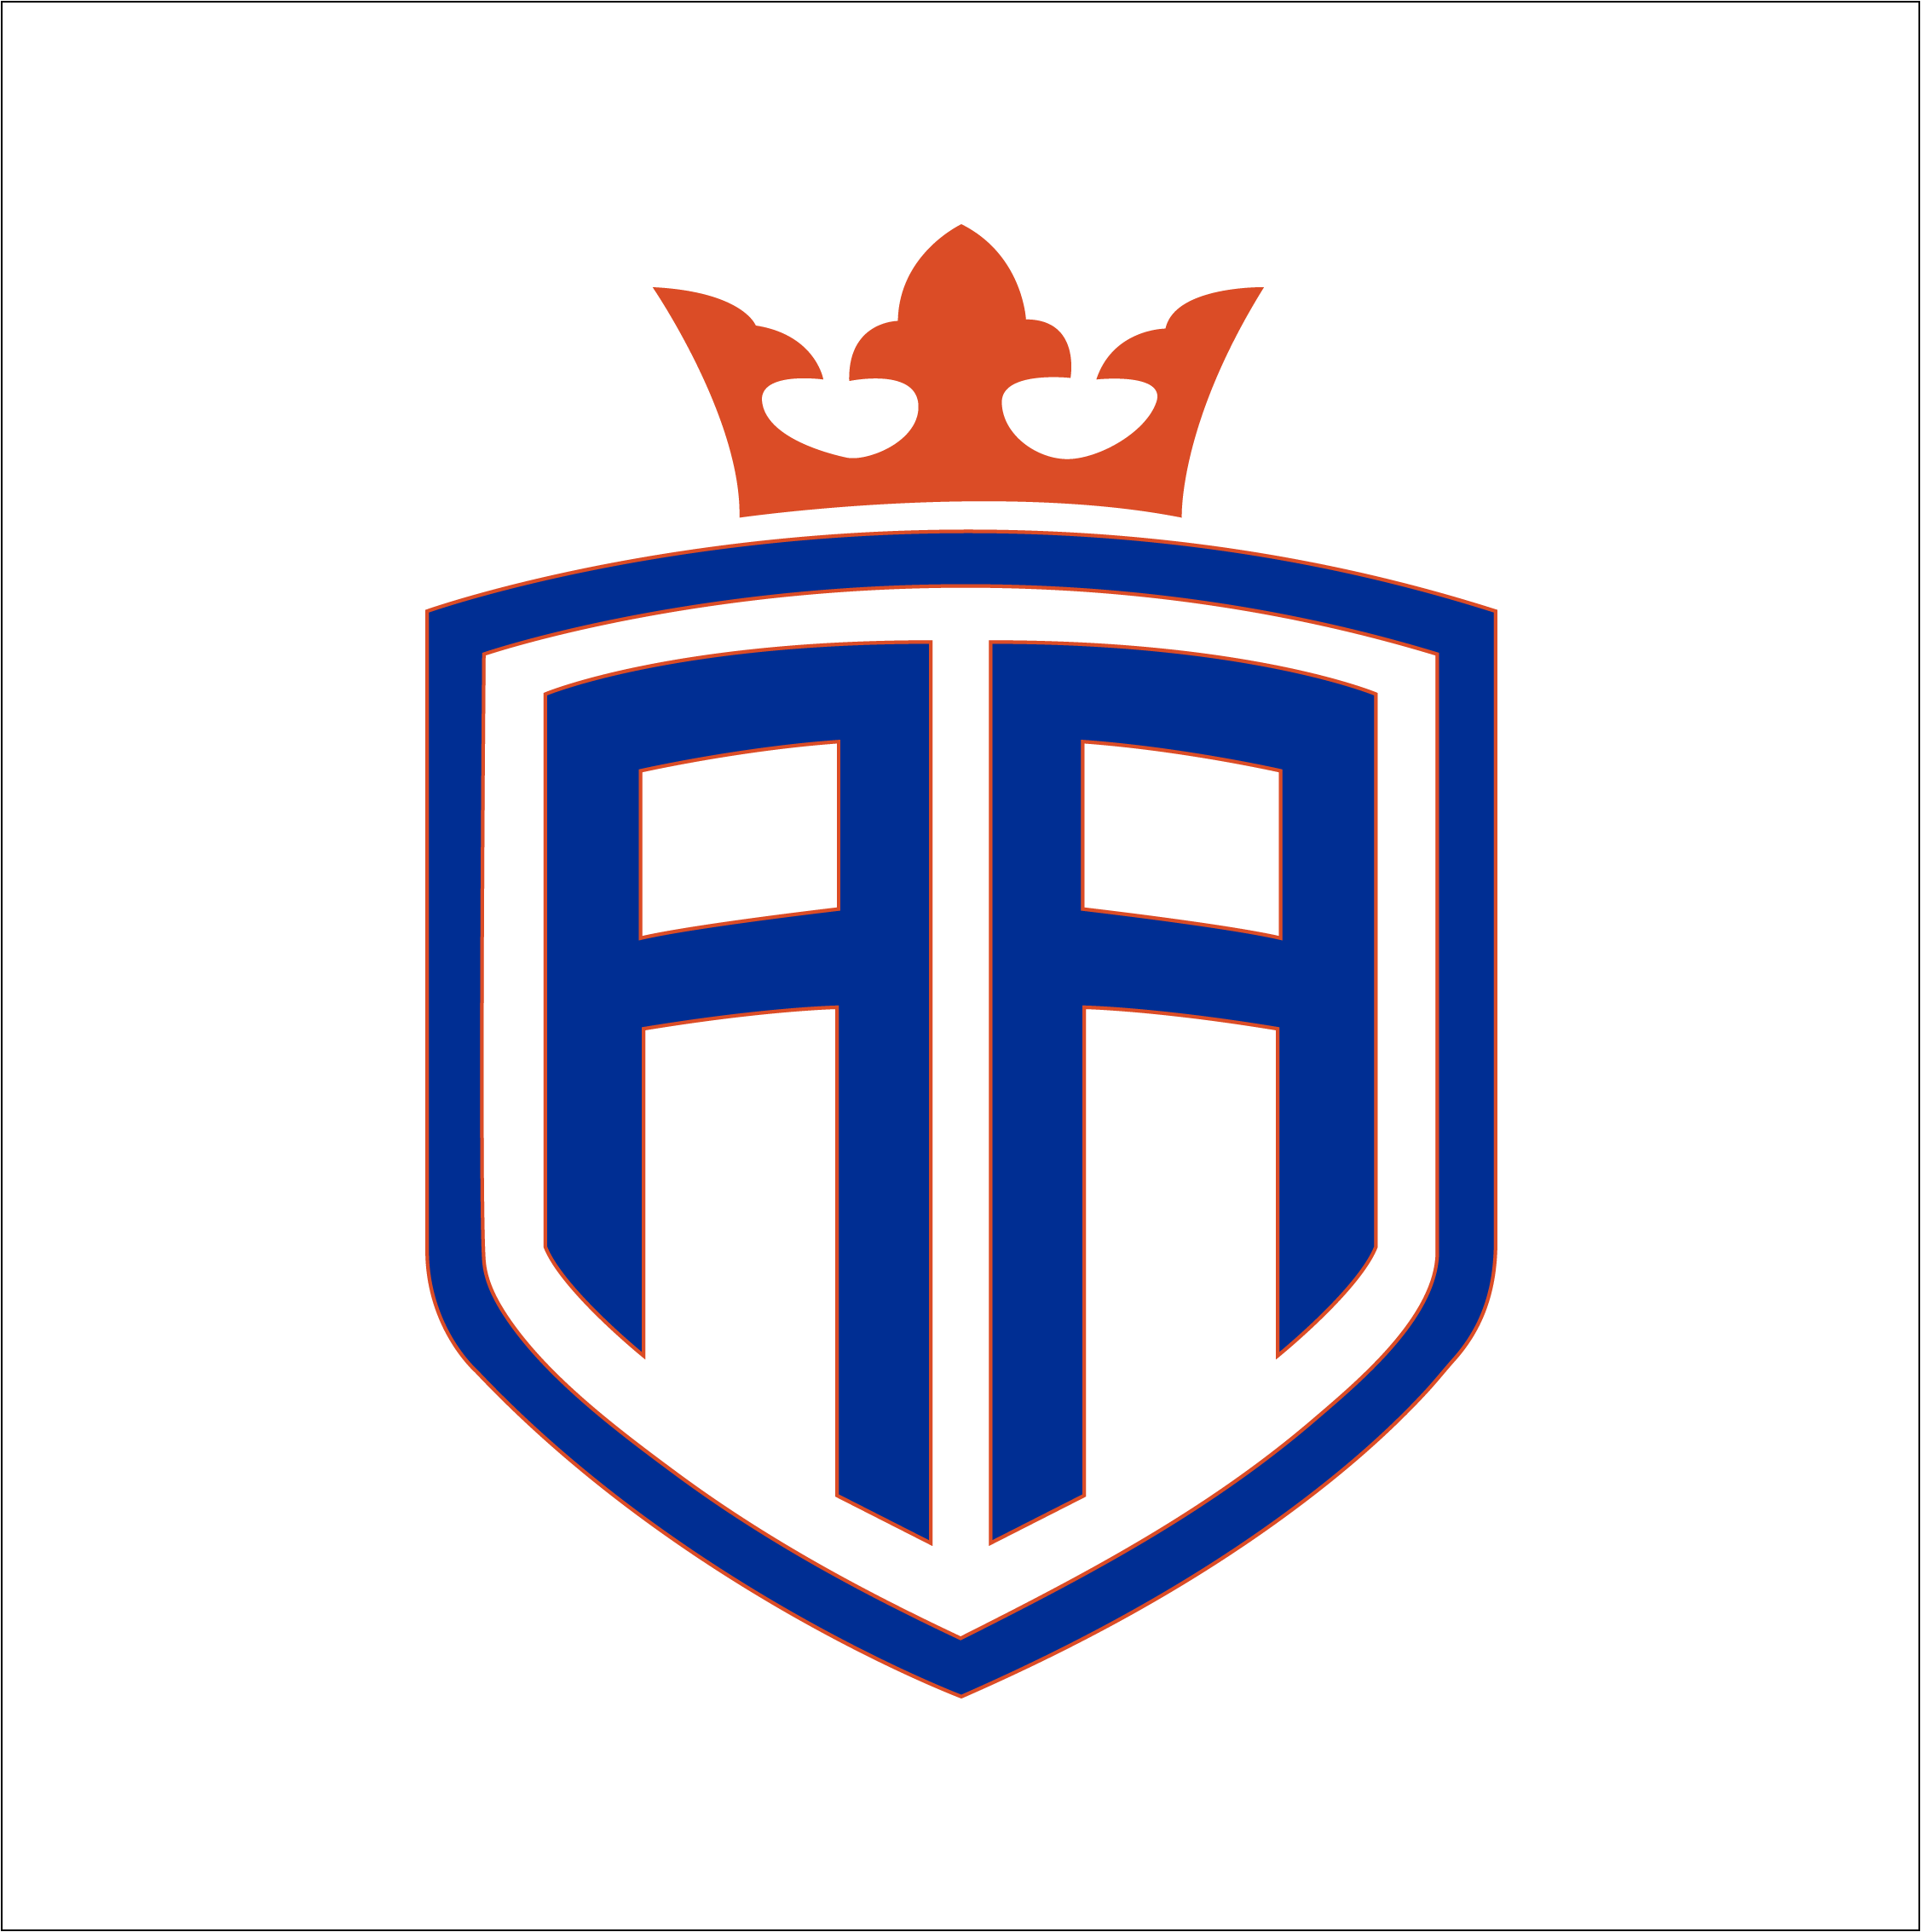 A blue and white shield with an orange crown.